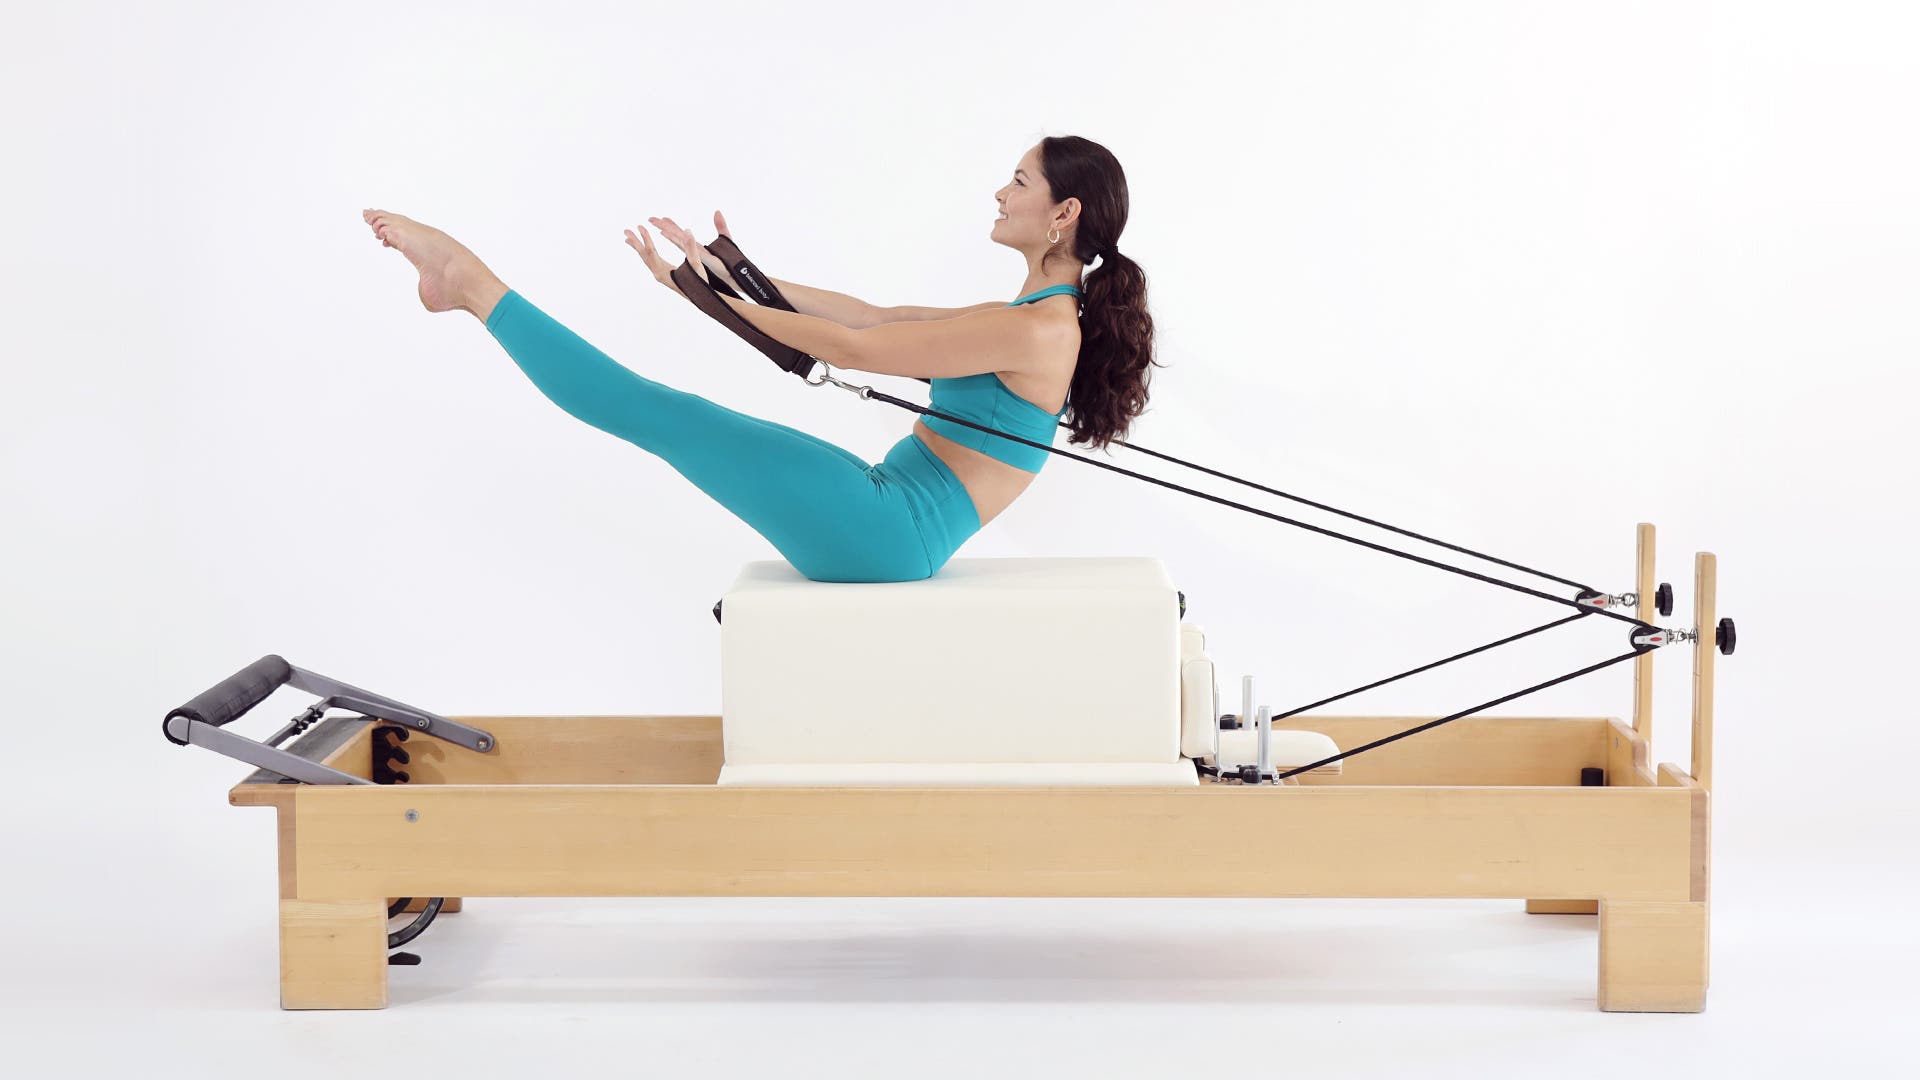 4 Practical Reasons You Should Own a Pilates Reformer Machine